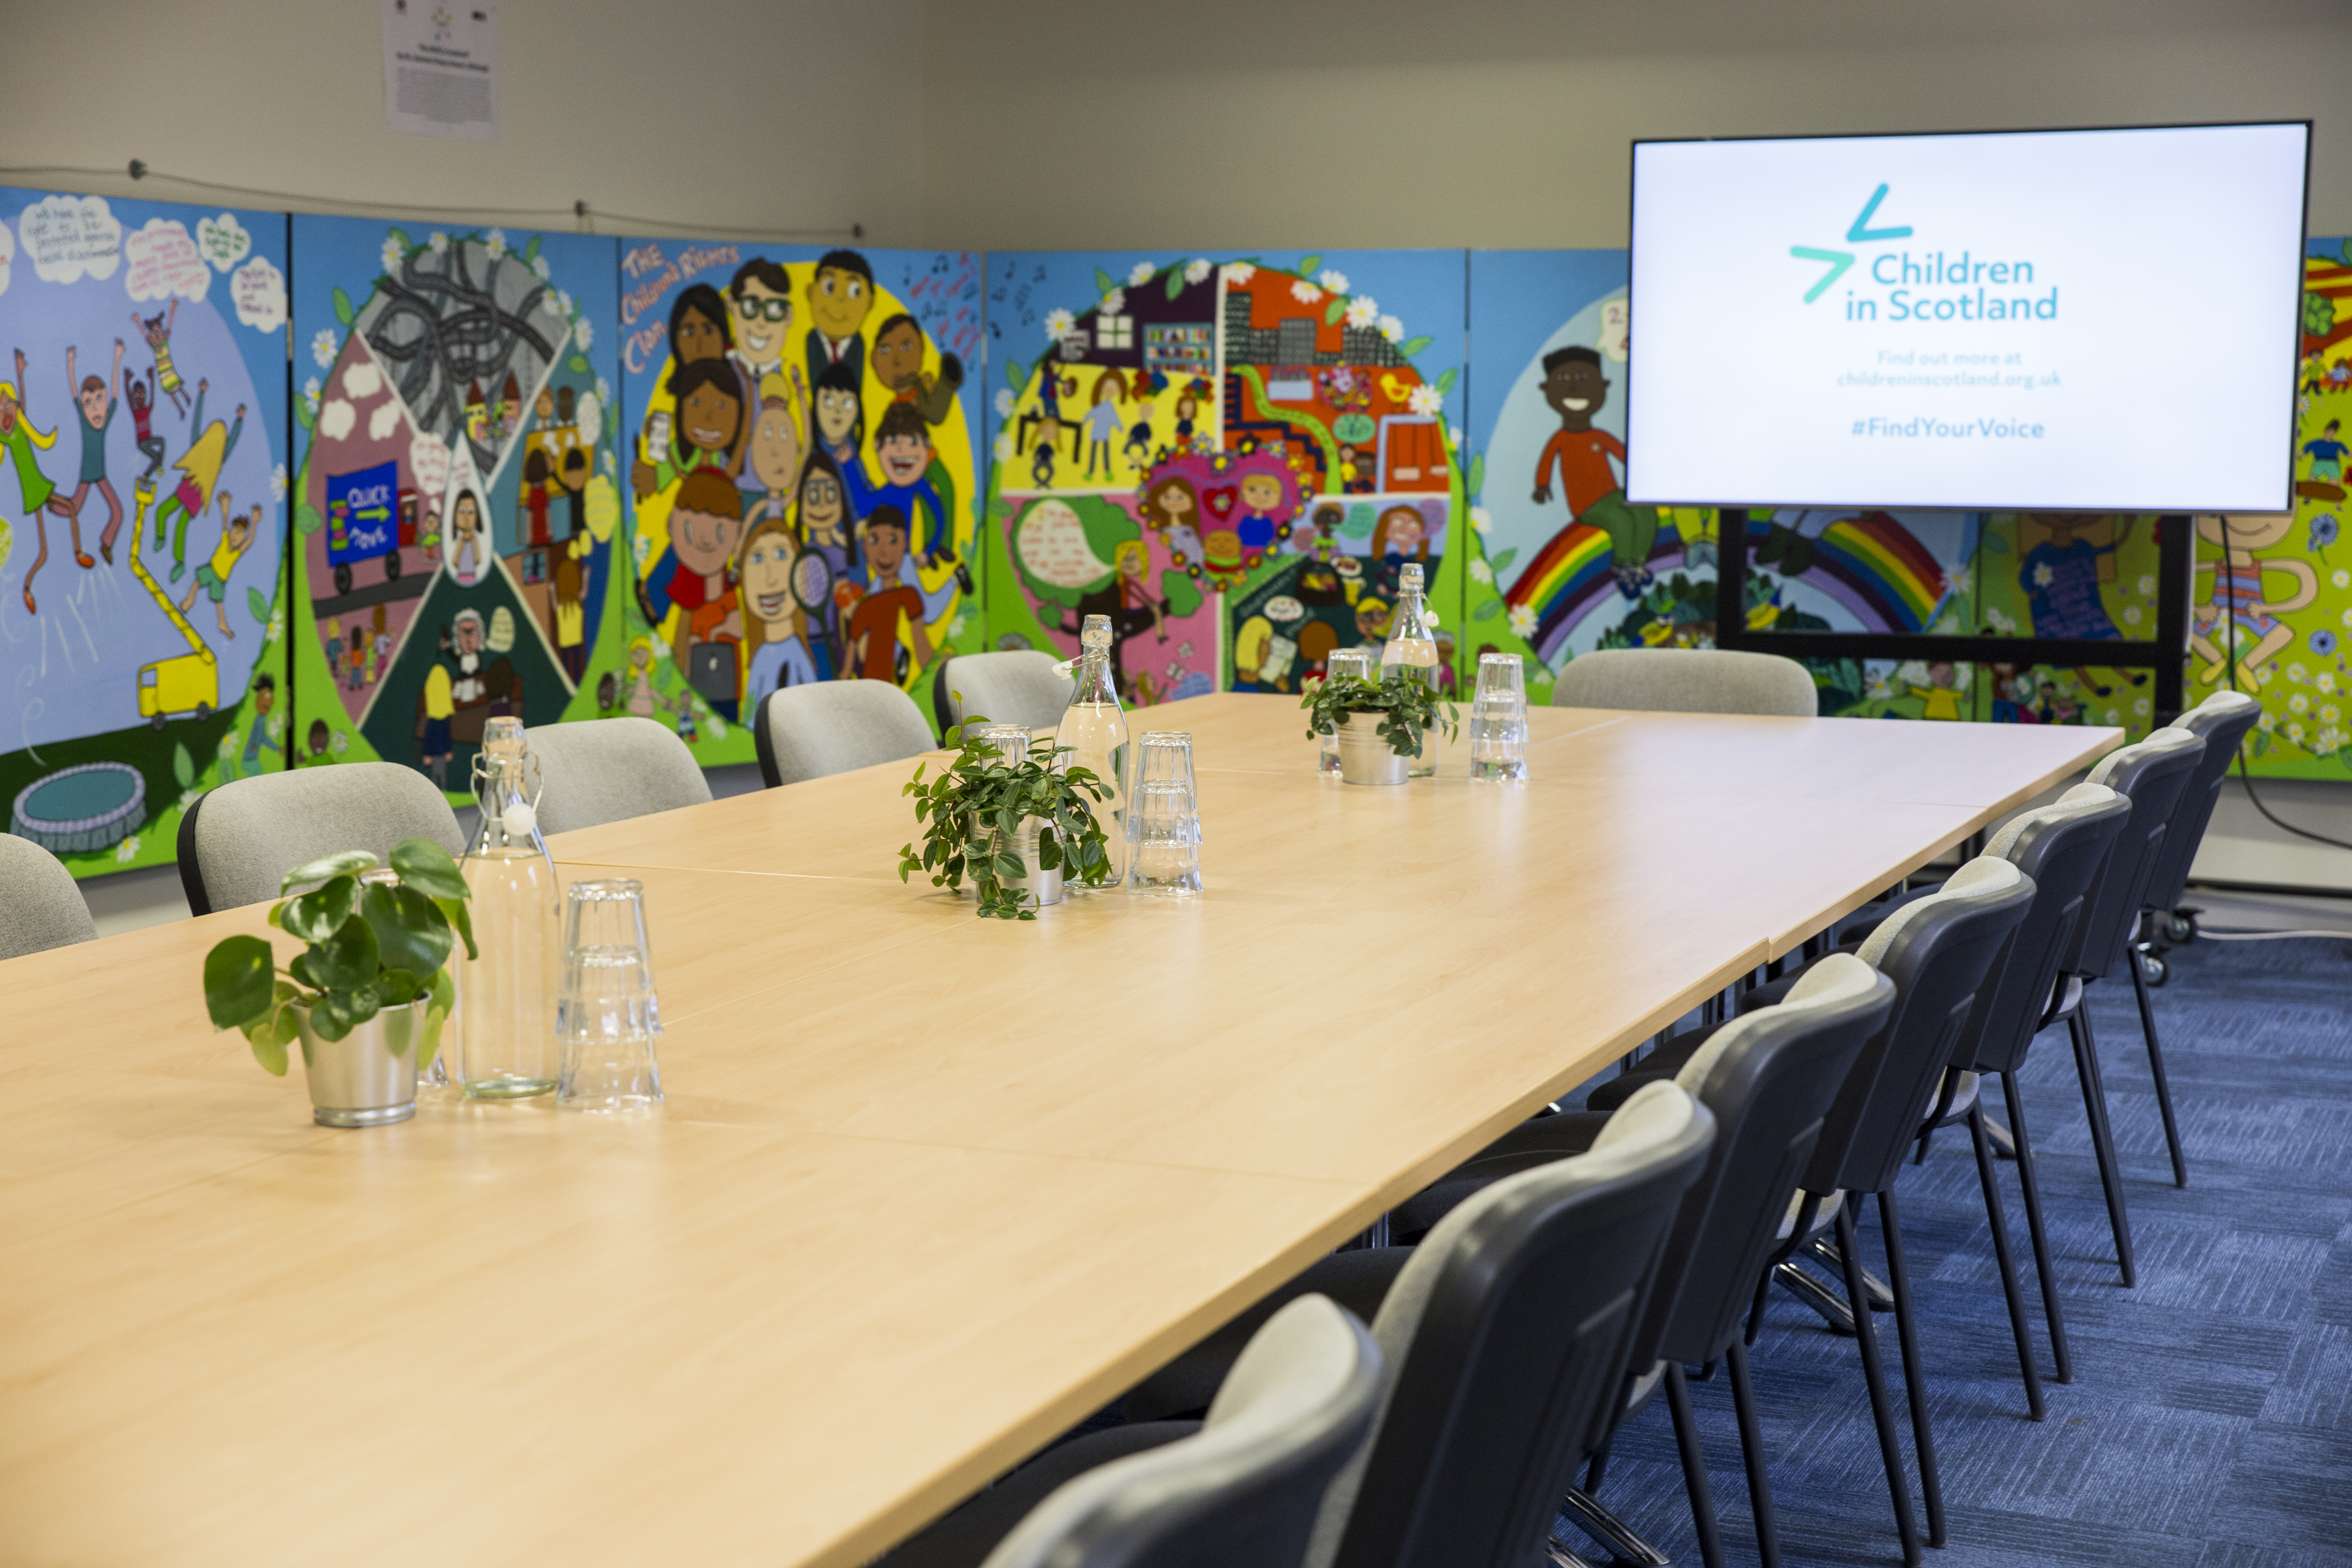 Photo of a large meeting room with a table with chairs on either side of it. At the end is a large screen that says 'Children in Scotland' on it. There are children's drawings on the walls